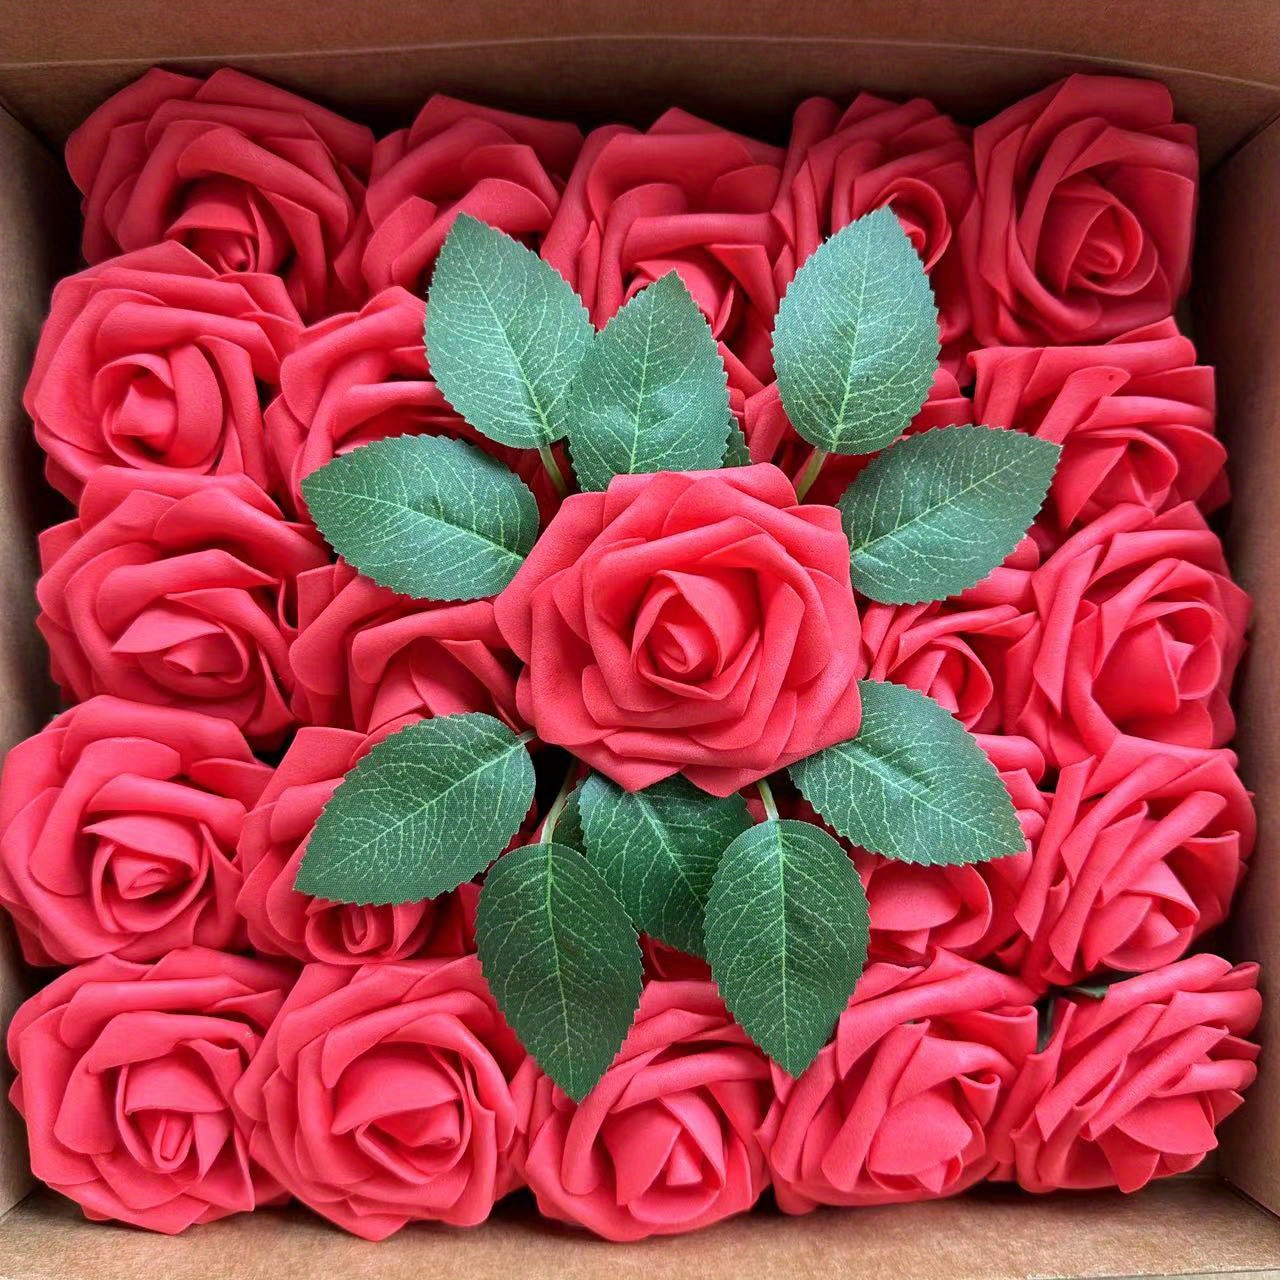 CEWOR 15pcs Artificial Pink Roses Flowers with Stems Silk Rose Bouquet  Valentine's Day Decorations for Wedding Bridal Party Home Table Mom  Birthday